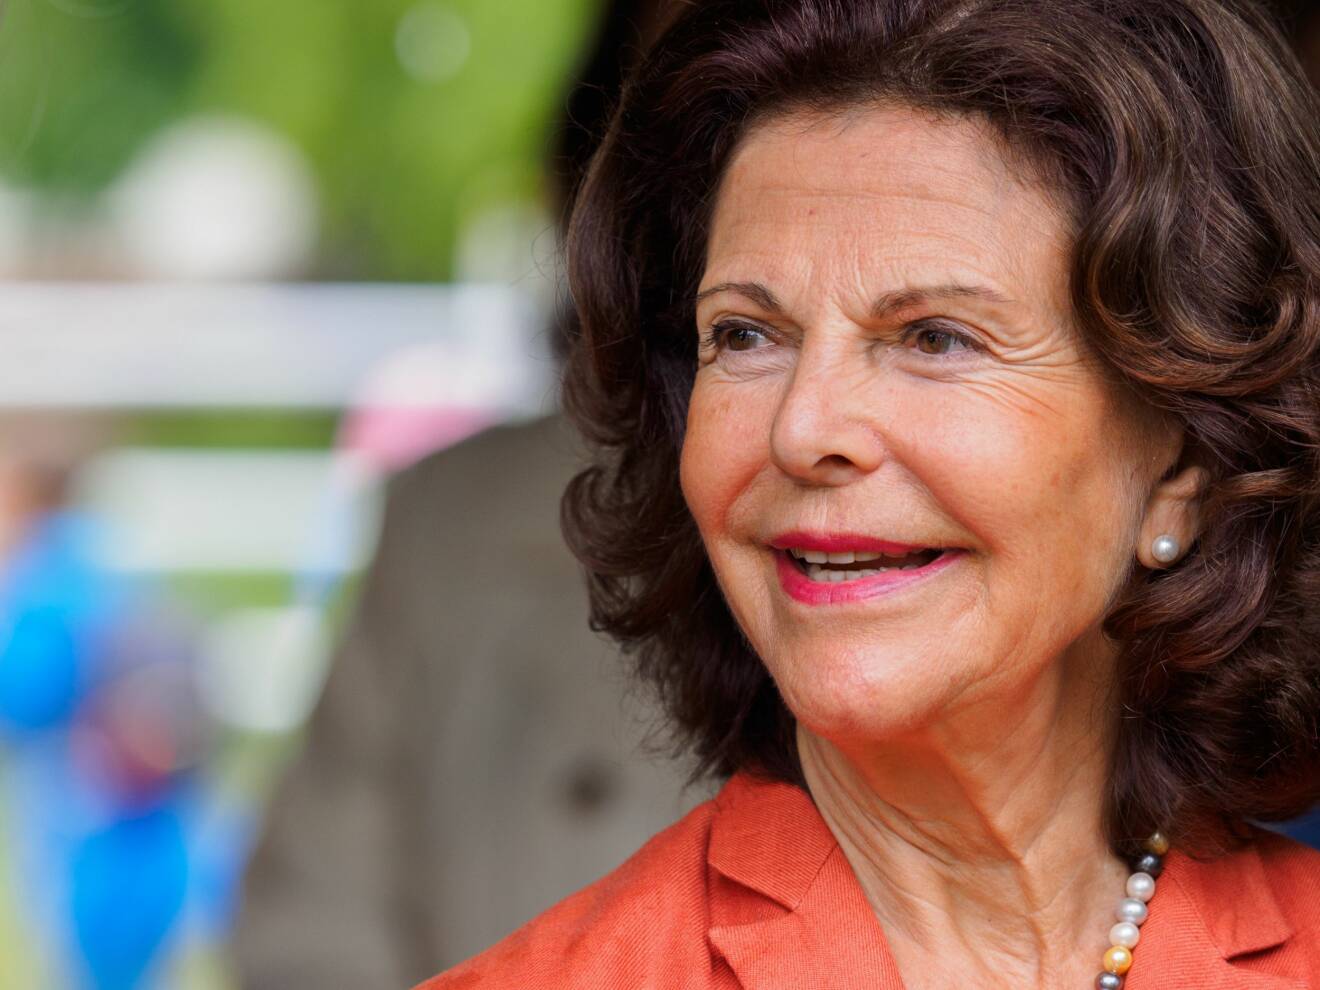 Queen Silvia of Sweden smiles at the Erlebnispark Thurn adventure park in Heroldsbach, Germany, 2 August 2016. Queen Silvia of Sweden visited the children's holiday camp of the German TV lottery at the Schloss Thurn adventure park. PHOTO: NICOLAS ARMER/DPA (c) DPA / IBL Bildbyrå